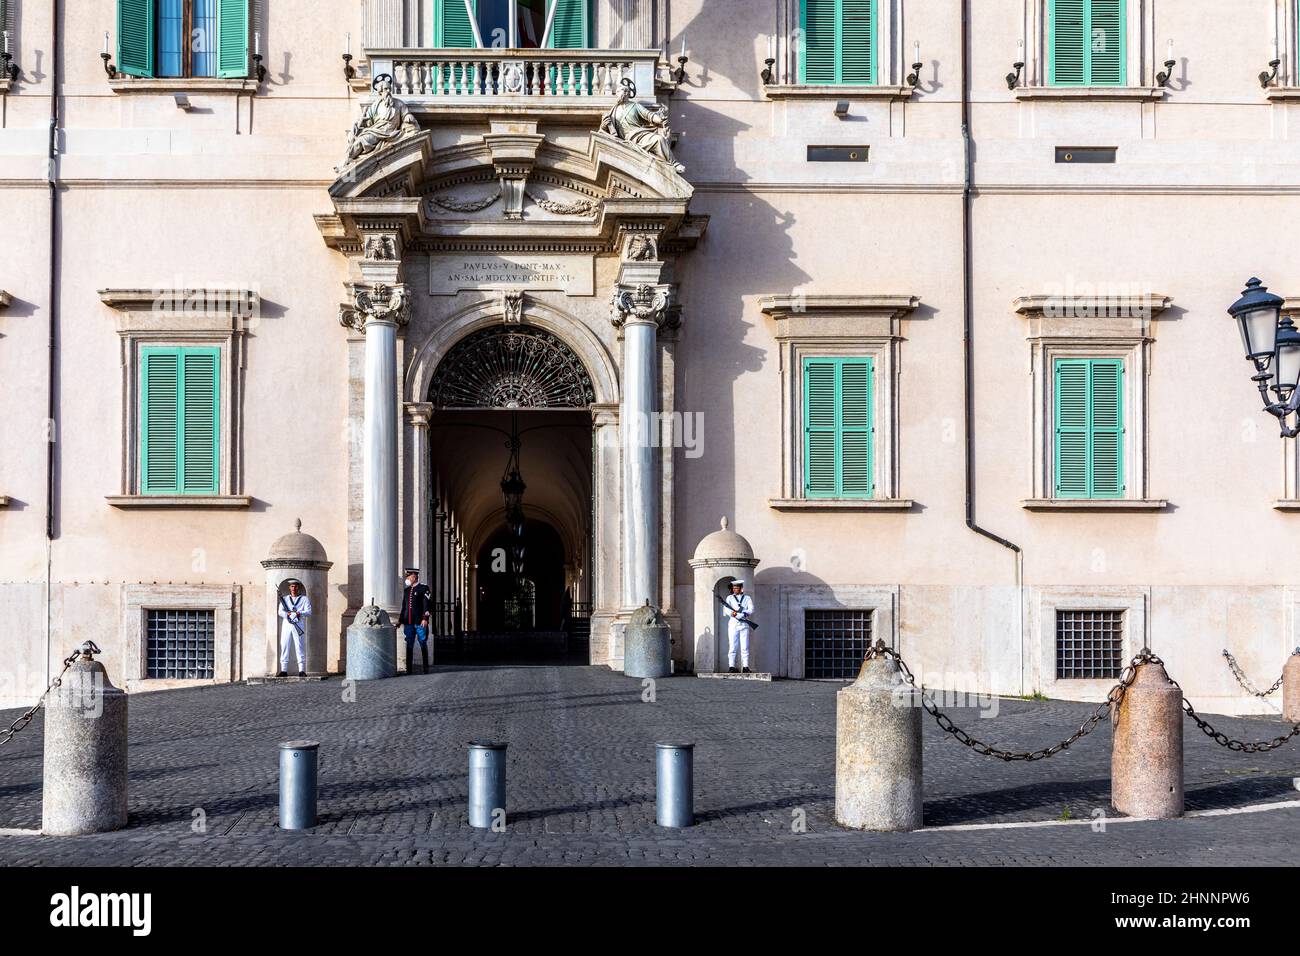 The Piazza del Quirinale with the Quirinal Palace and the guards in military uniform in Rome, Lazio, Italy Stock Photo